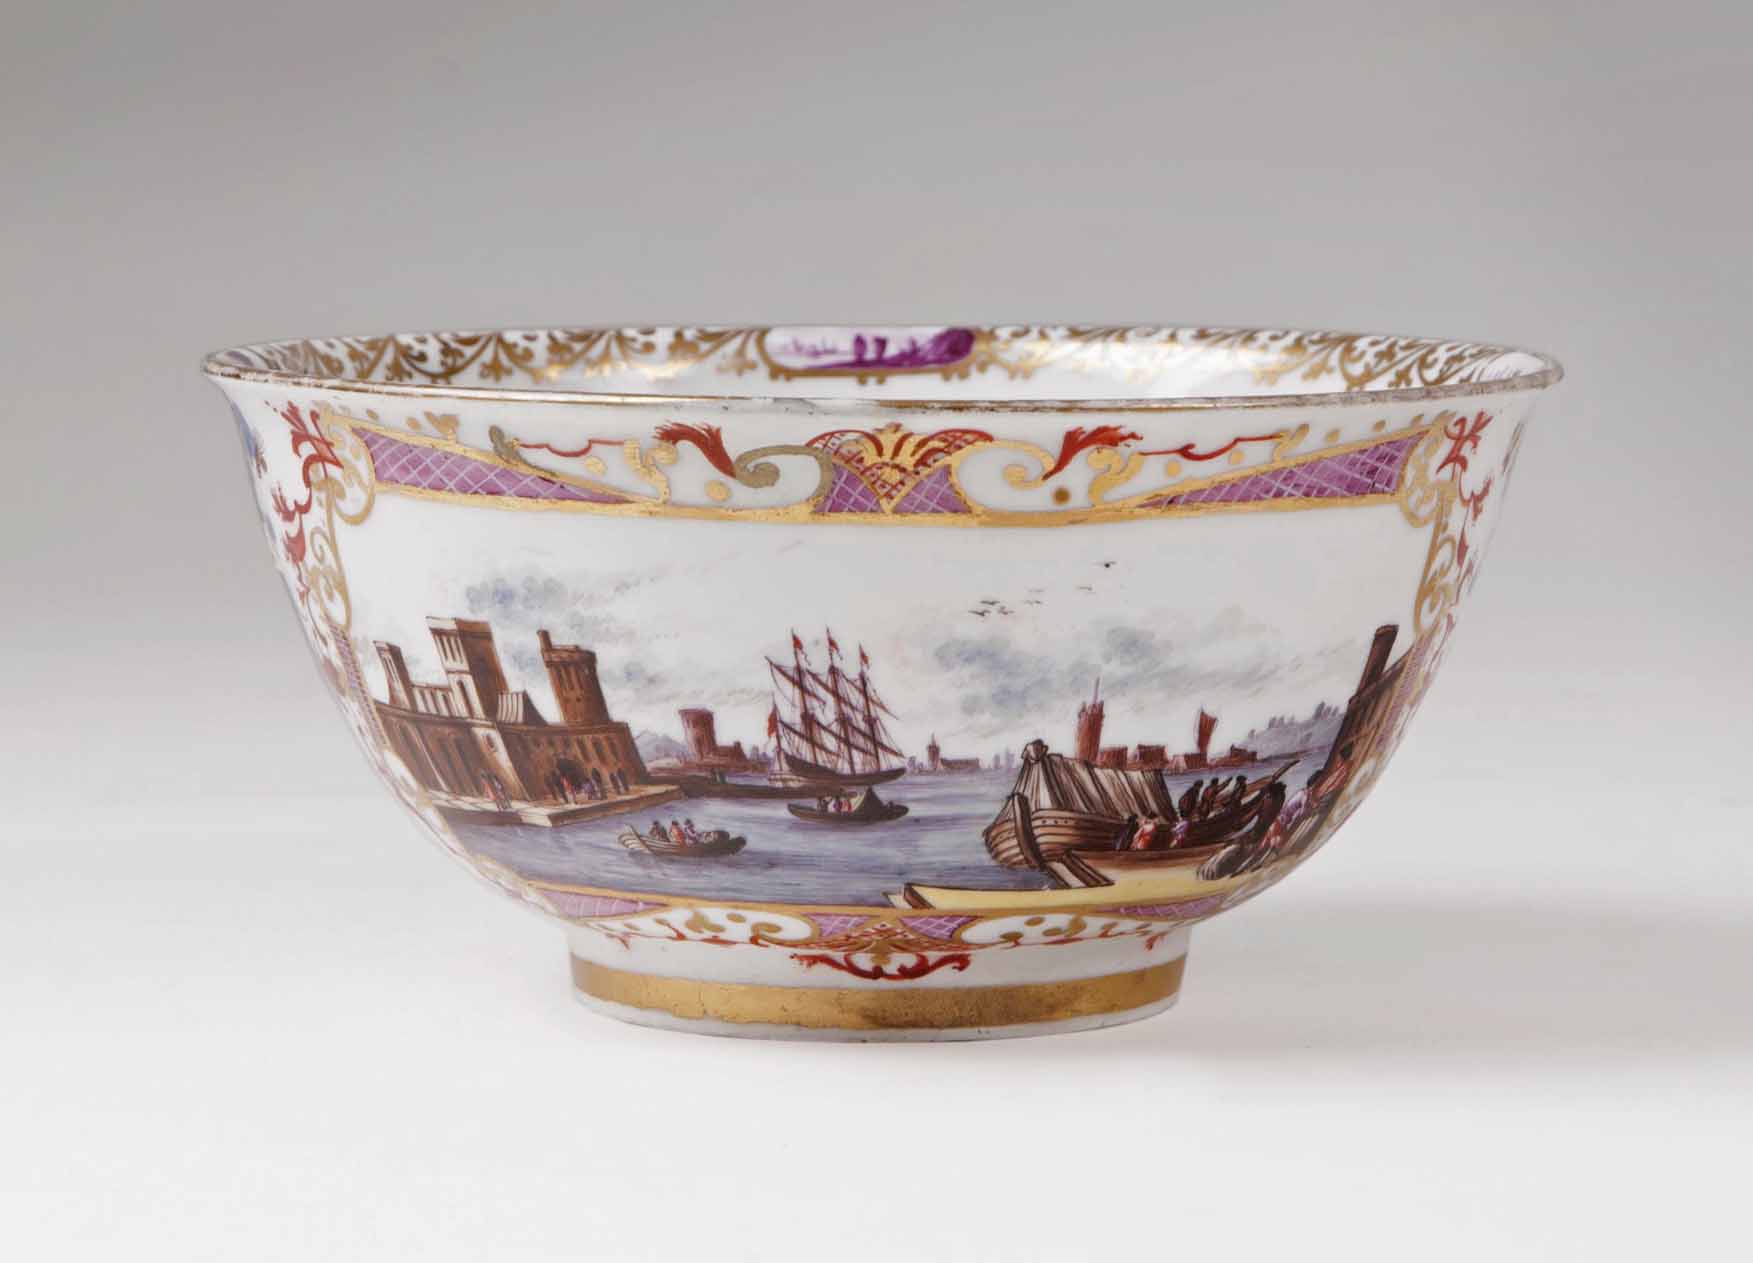 A bowl of museum-like quality with fine landscape decor in the styl of J.G.Heintze - image 2